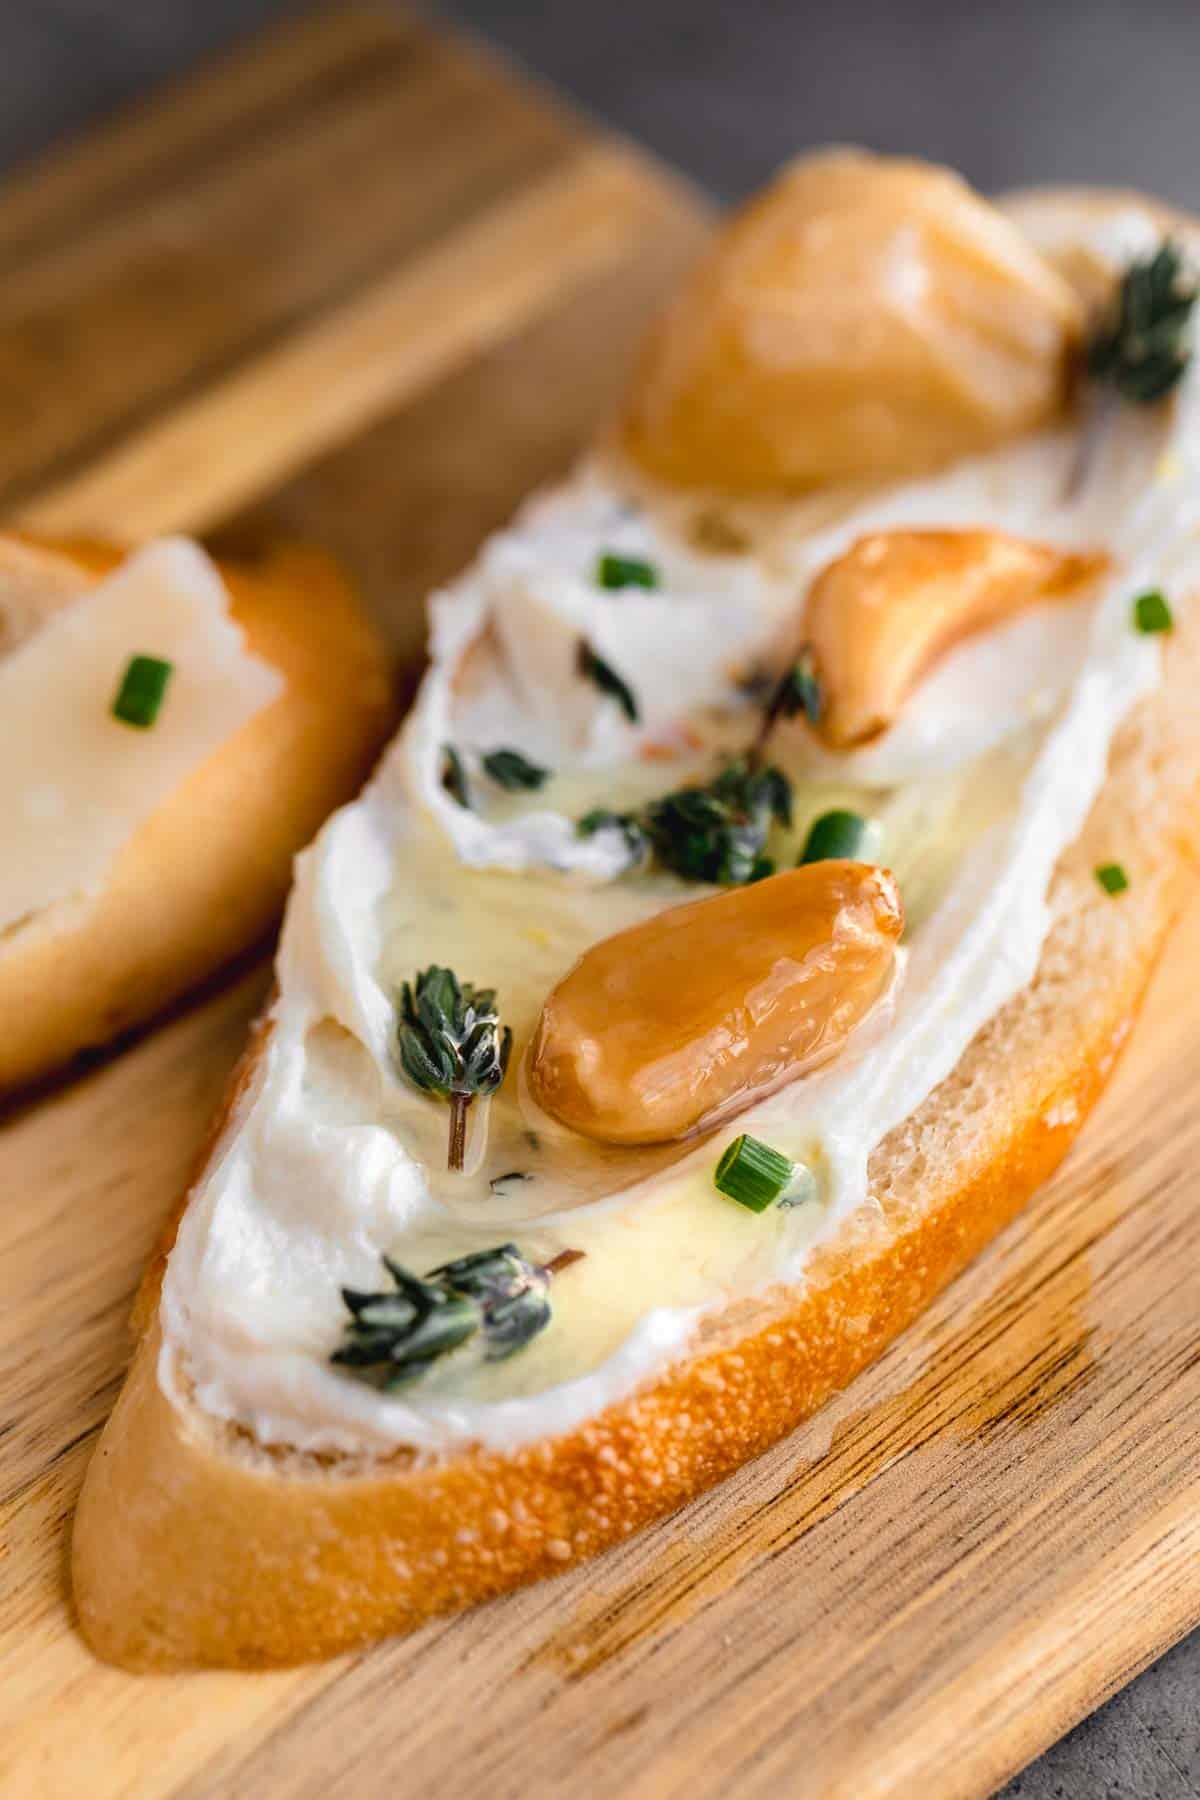 Garlic confit over the top of whipped goat cheese crostini.